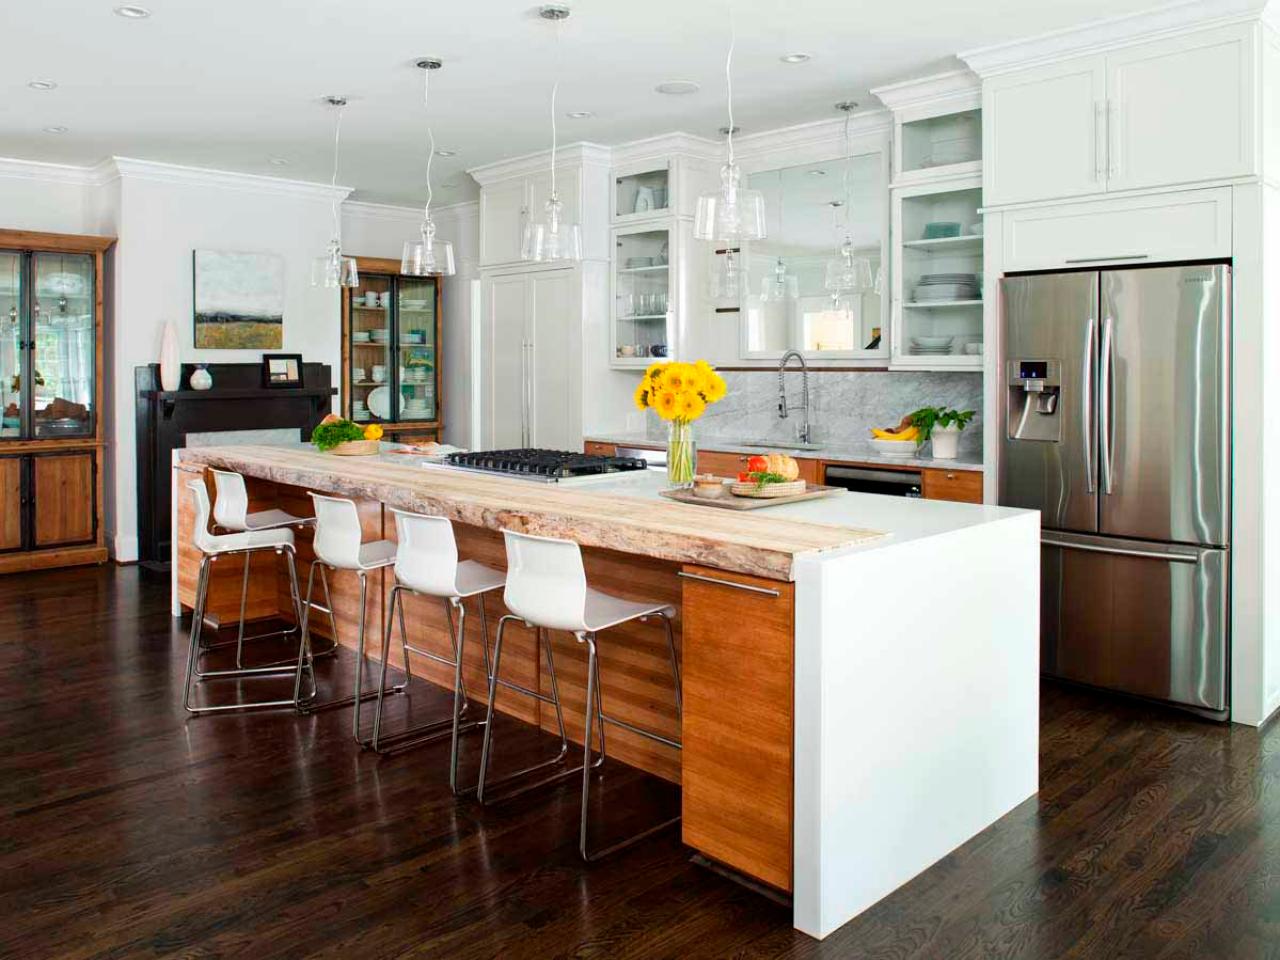 kitchen island seating contemporary hgtv islands designs modern bar wooden accent beautiful multi functional cabinets kitchens breakfast wood famous floor